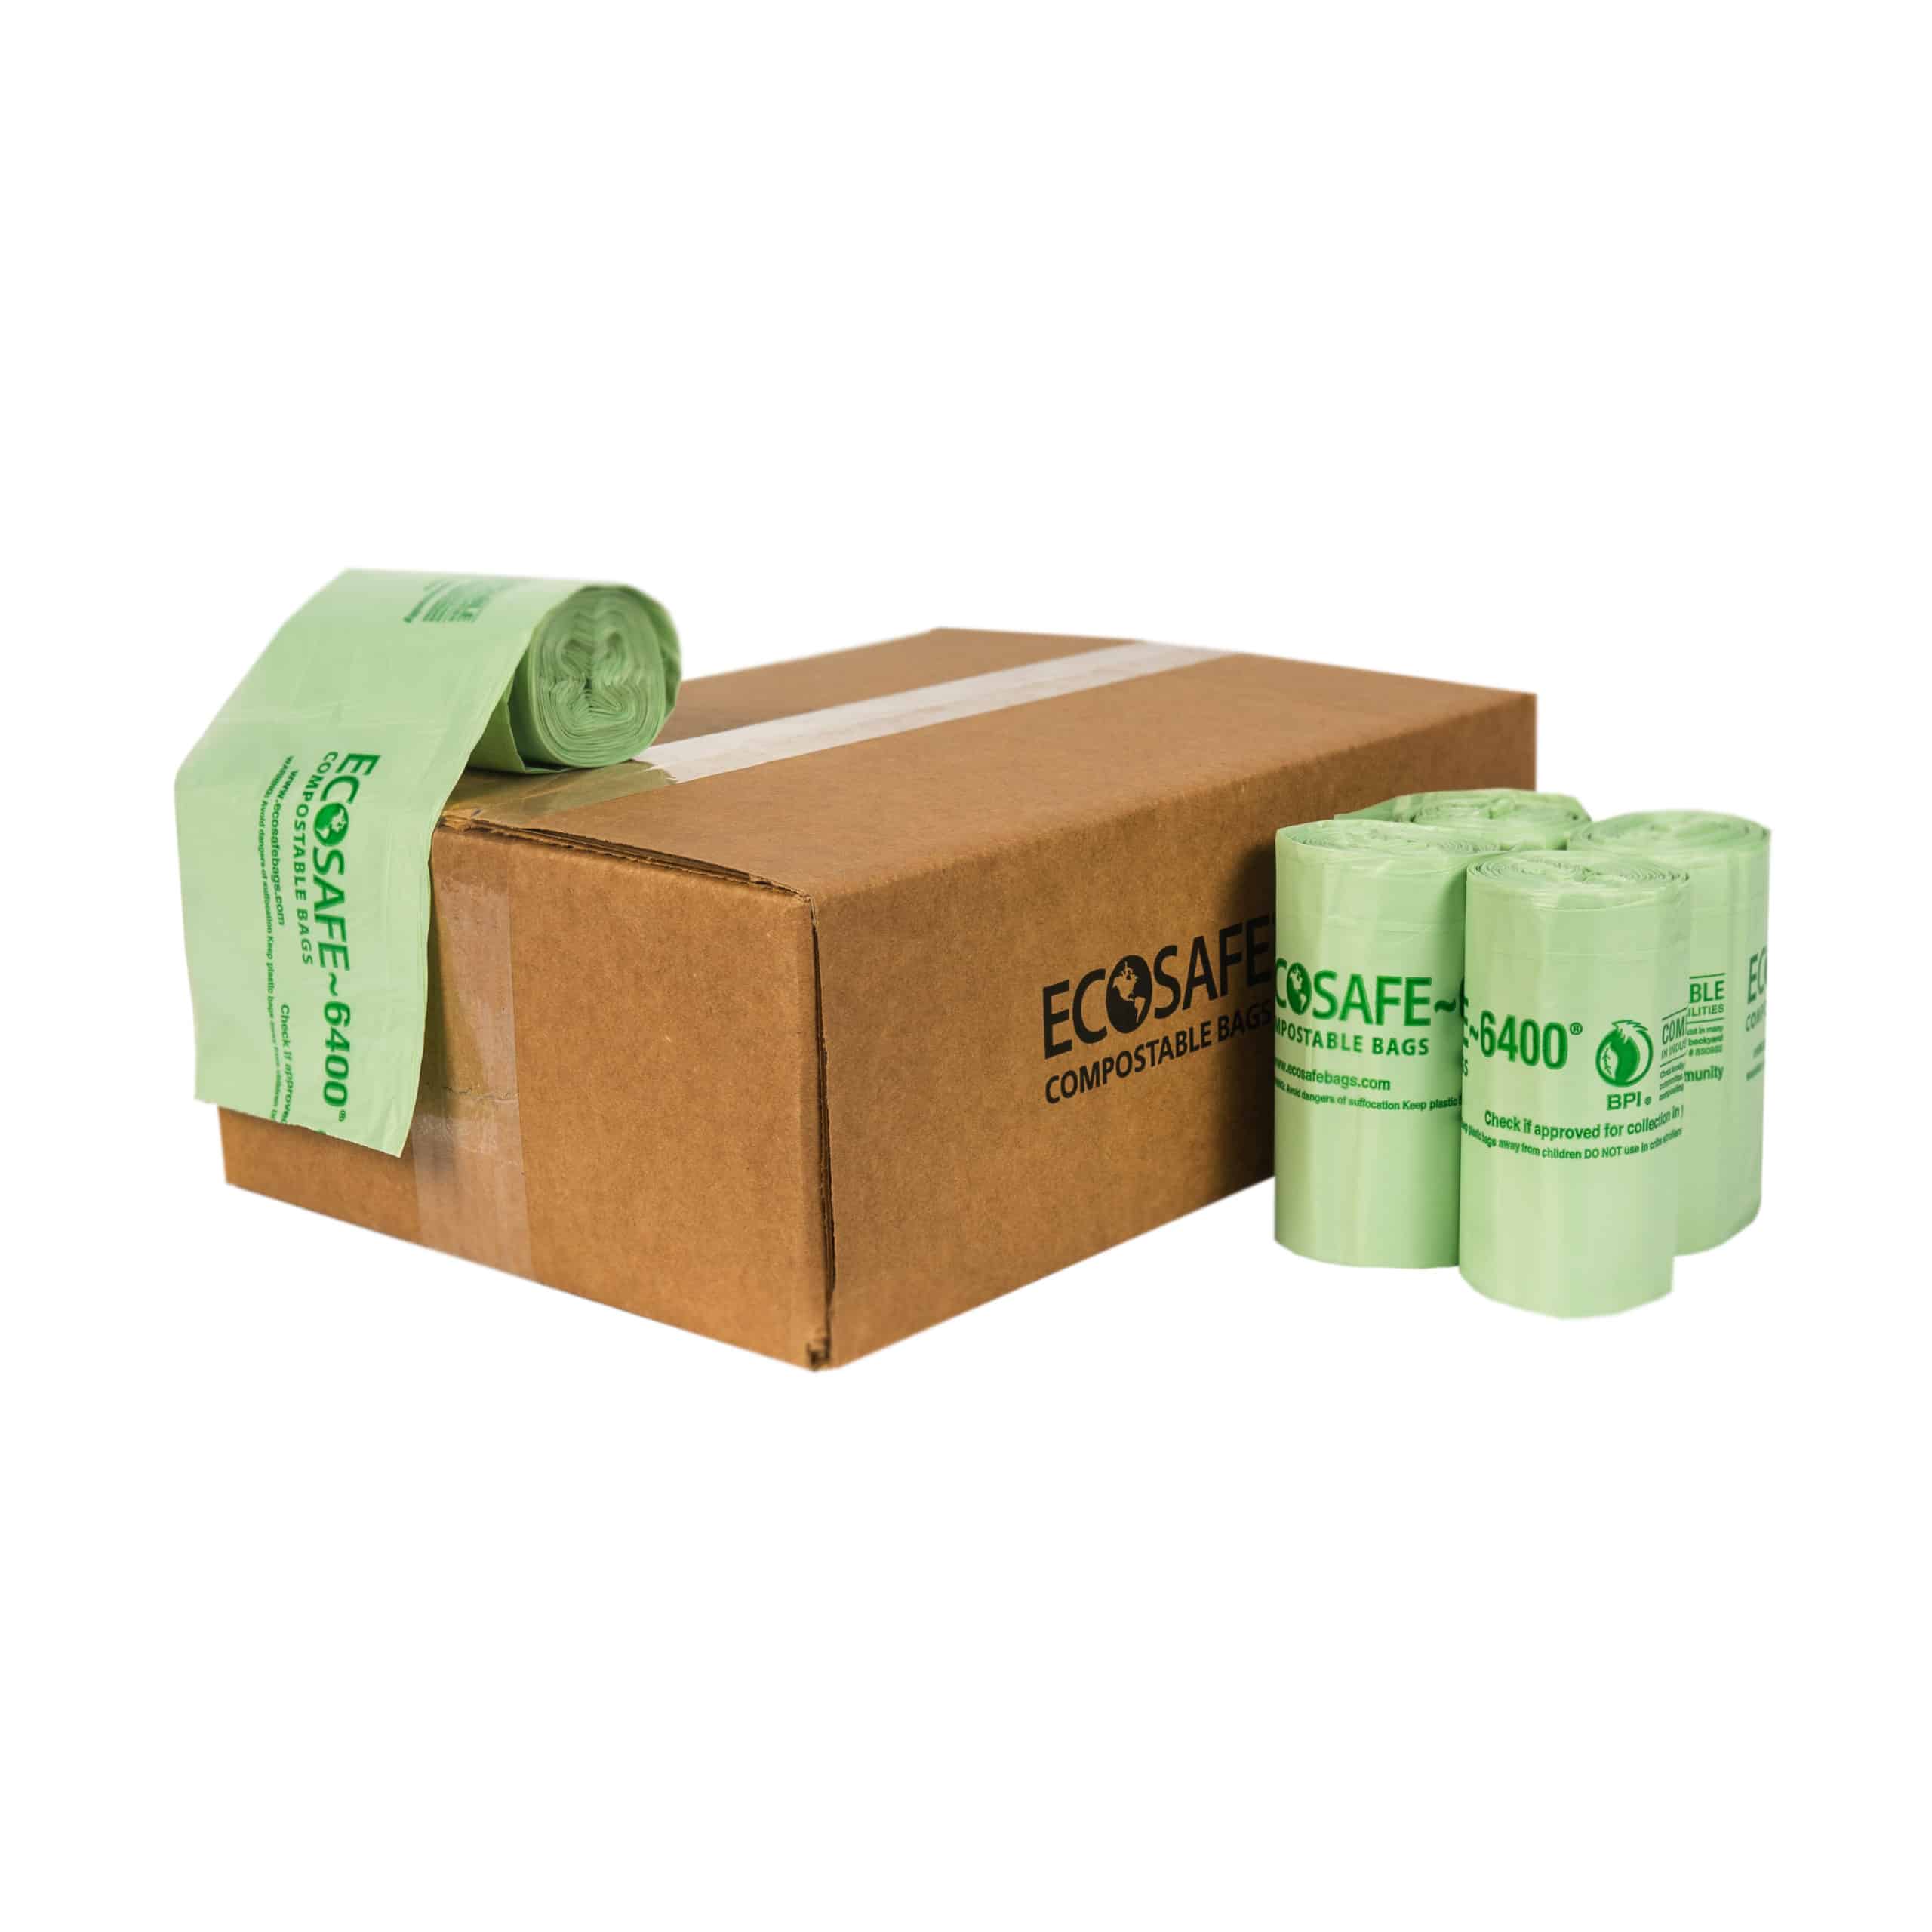 EcoSafe 82x70 Compostable Bags/Liners